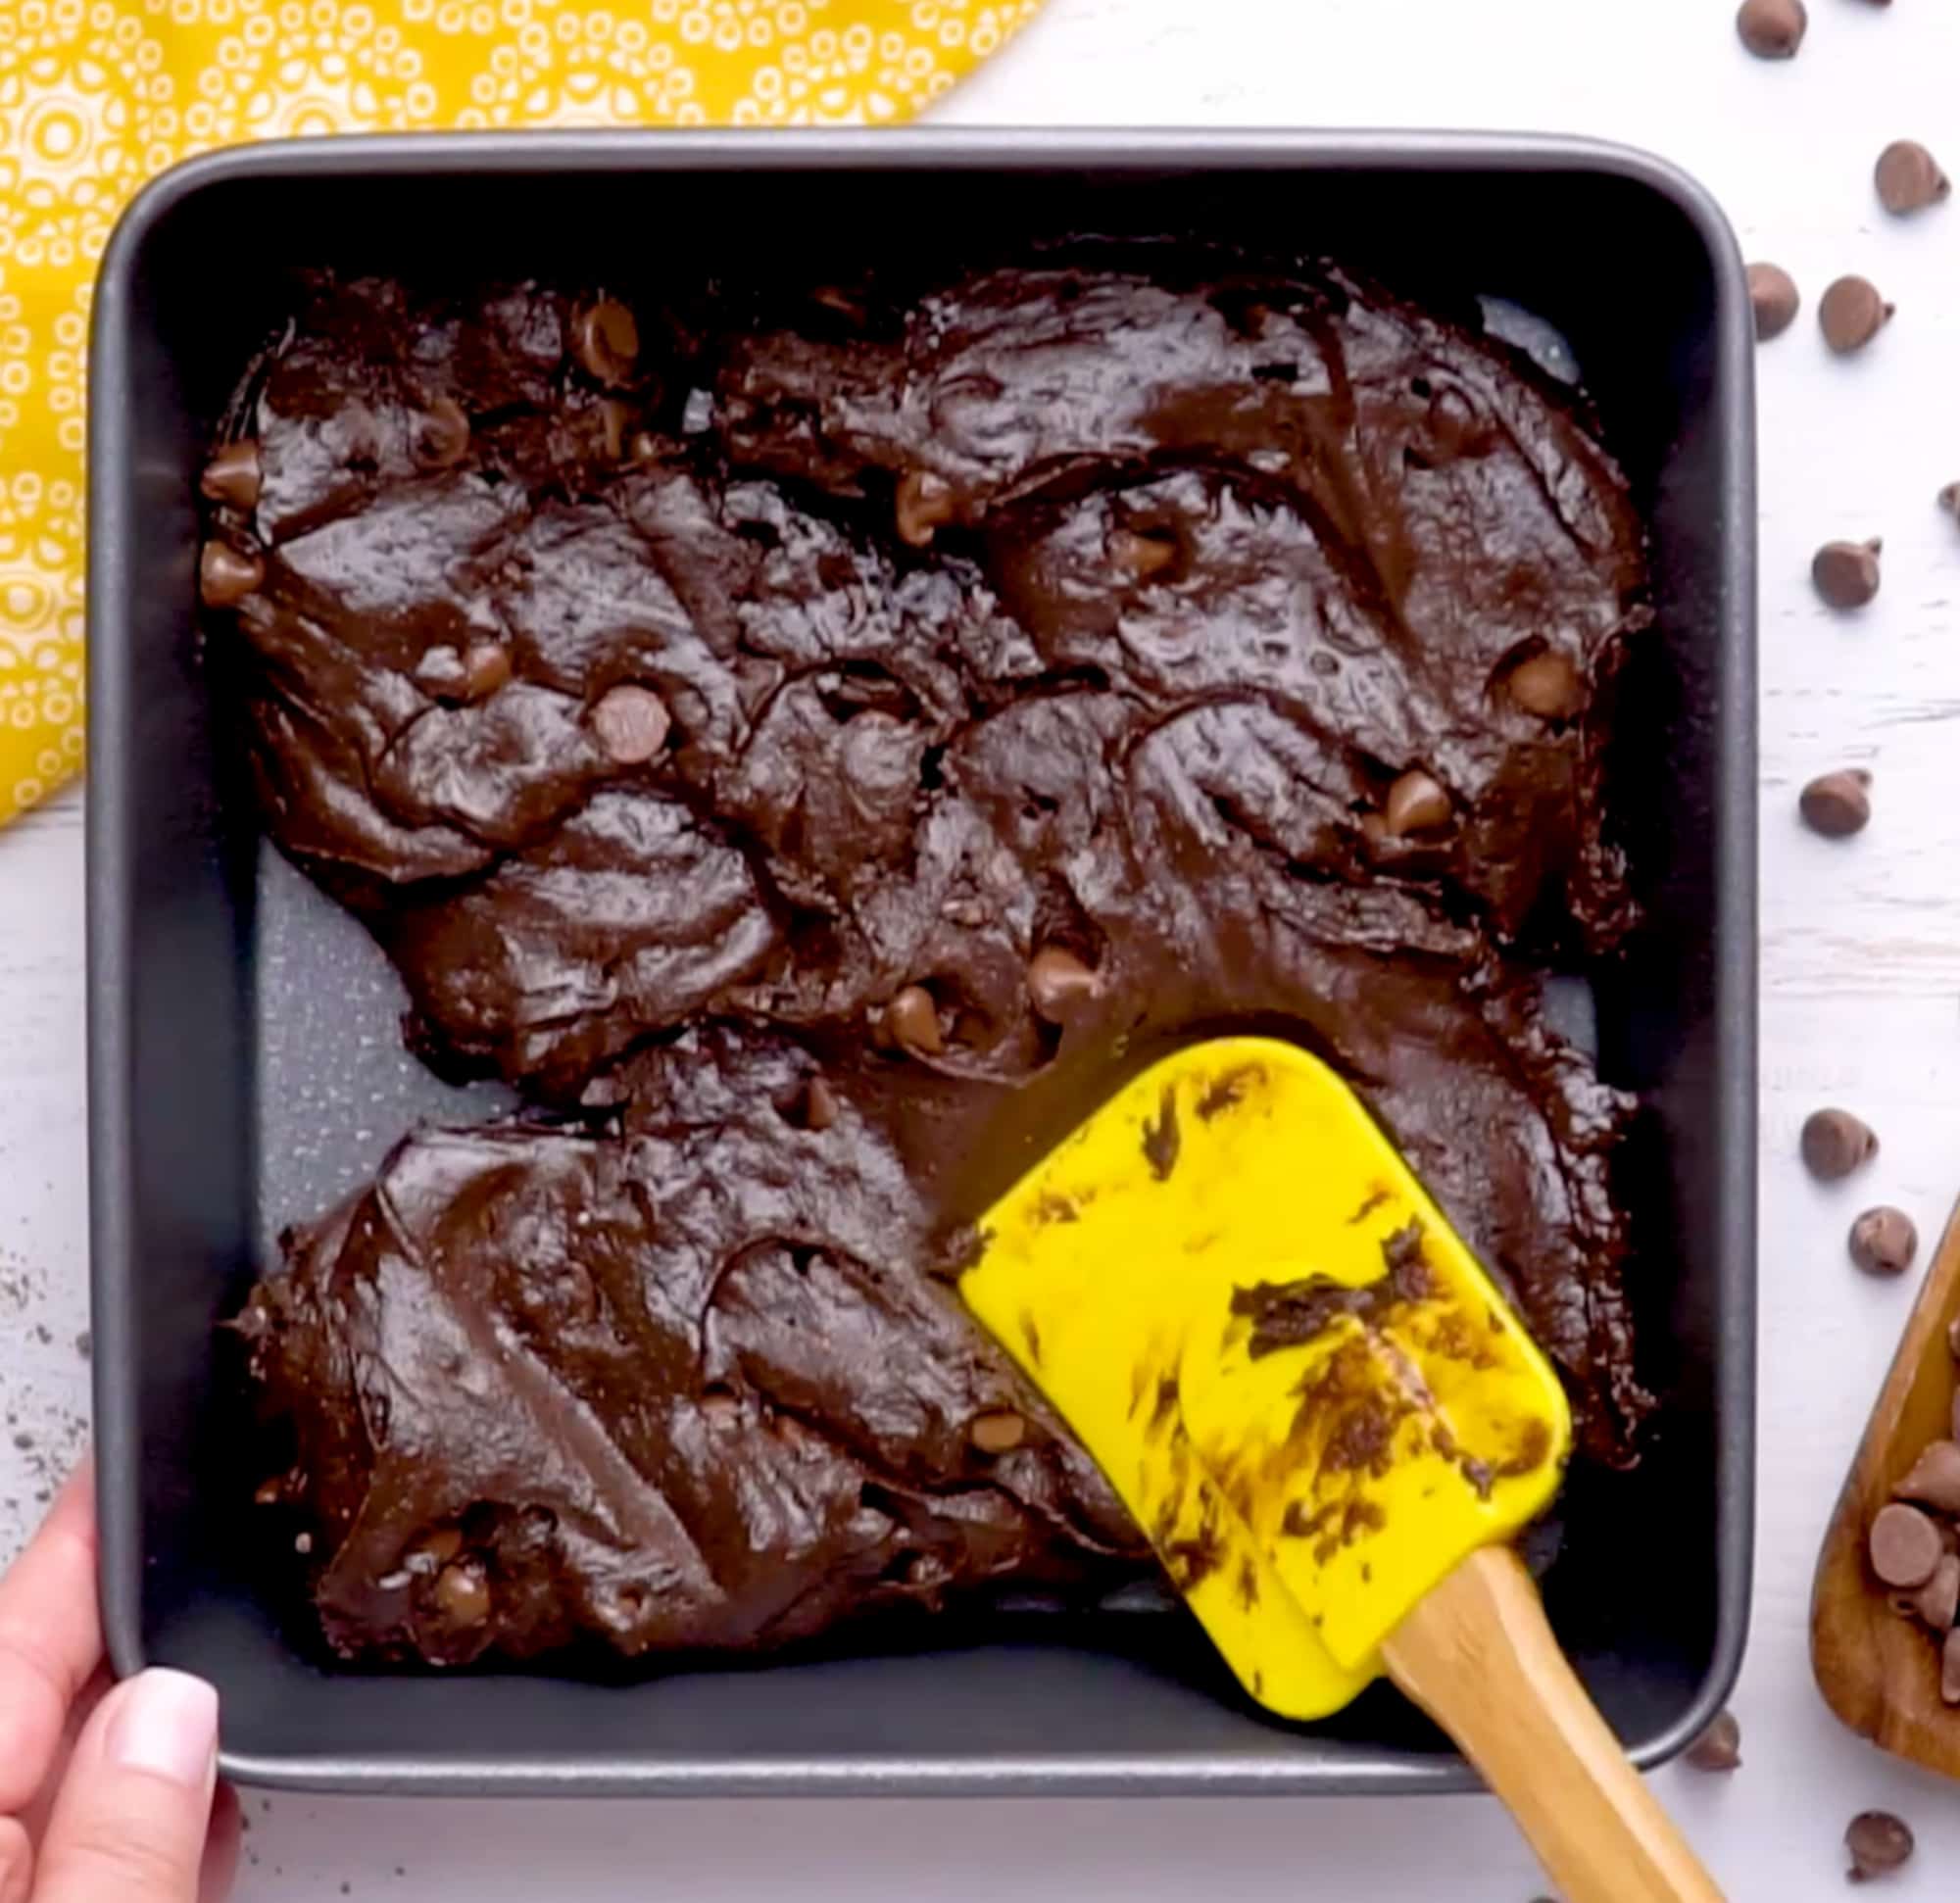 spreading the brownie batter into a baking dish using a rubber spatula